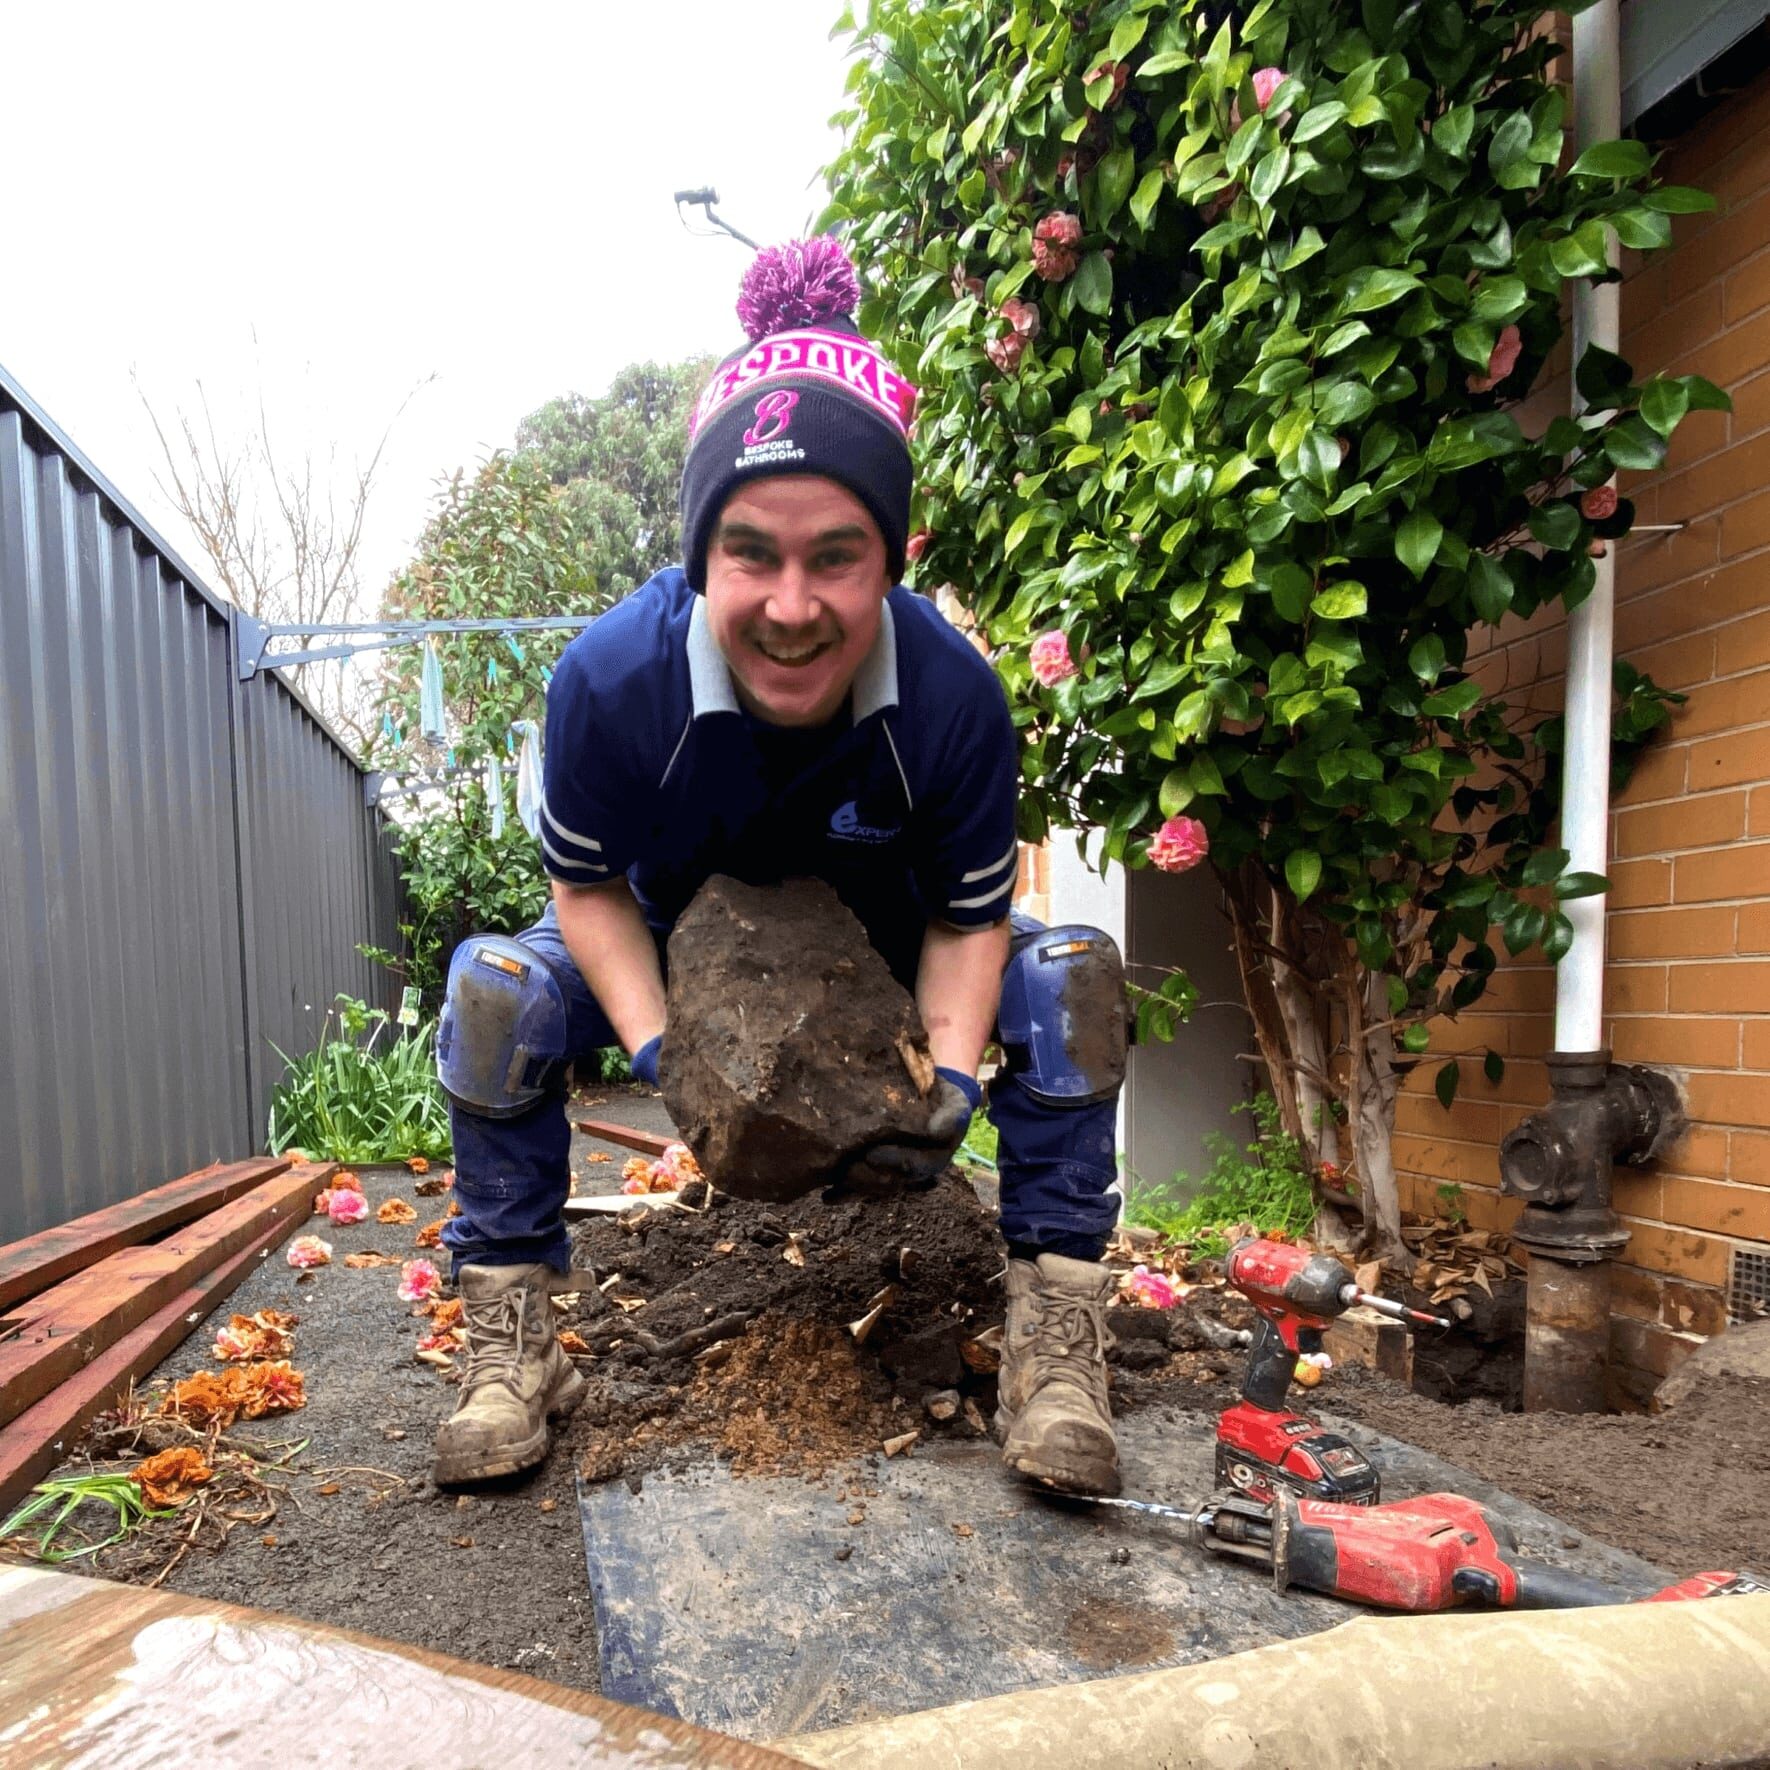 an expert plumber is holding a large rock in his hands. there is a green bush with pink fllowers on the right side. there is a dark grey corrugated fence behind him. The plumber is squatting and has a happy smile on his face.